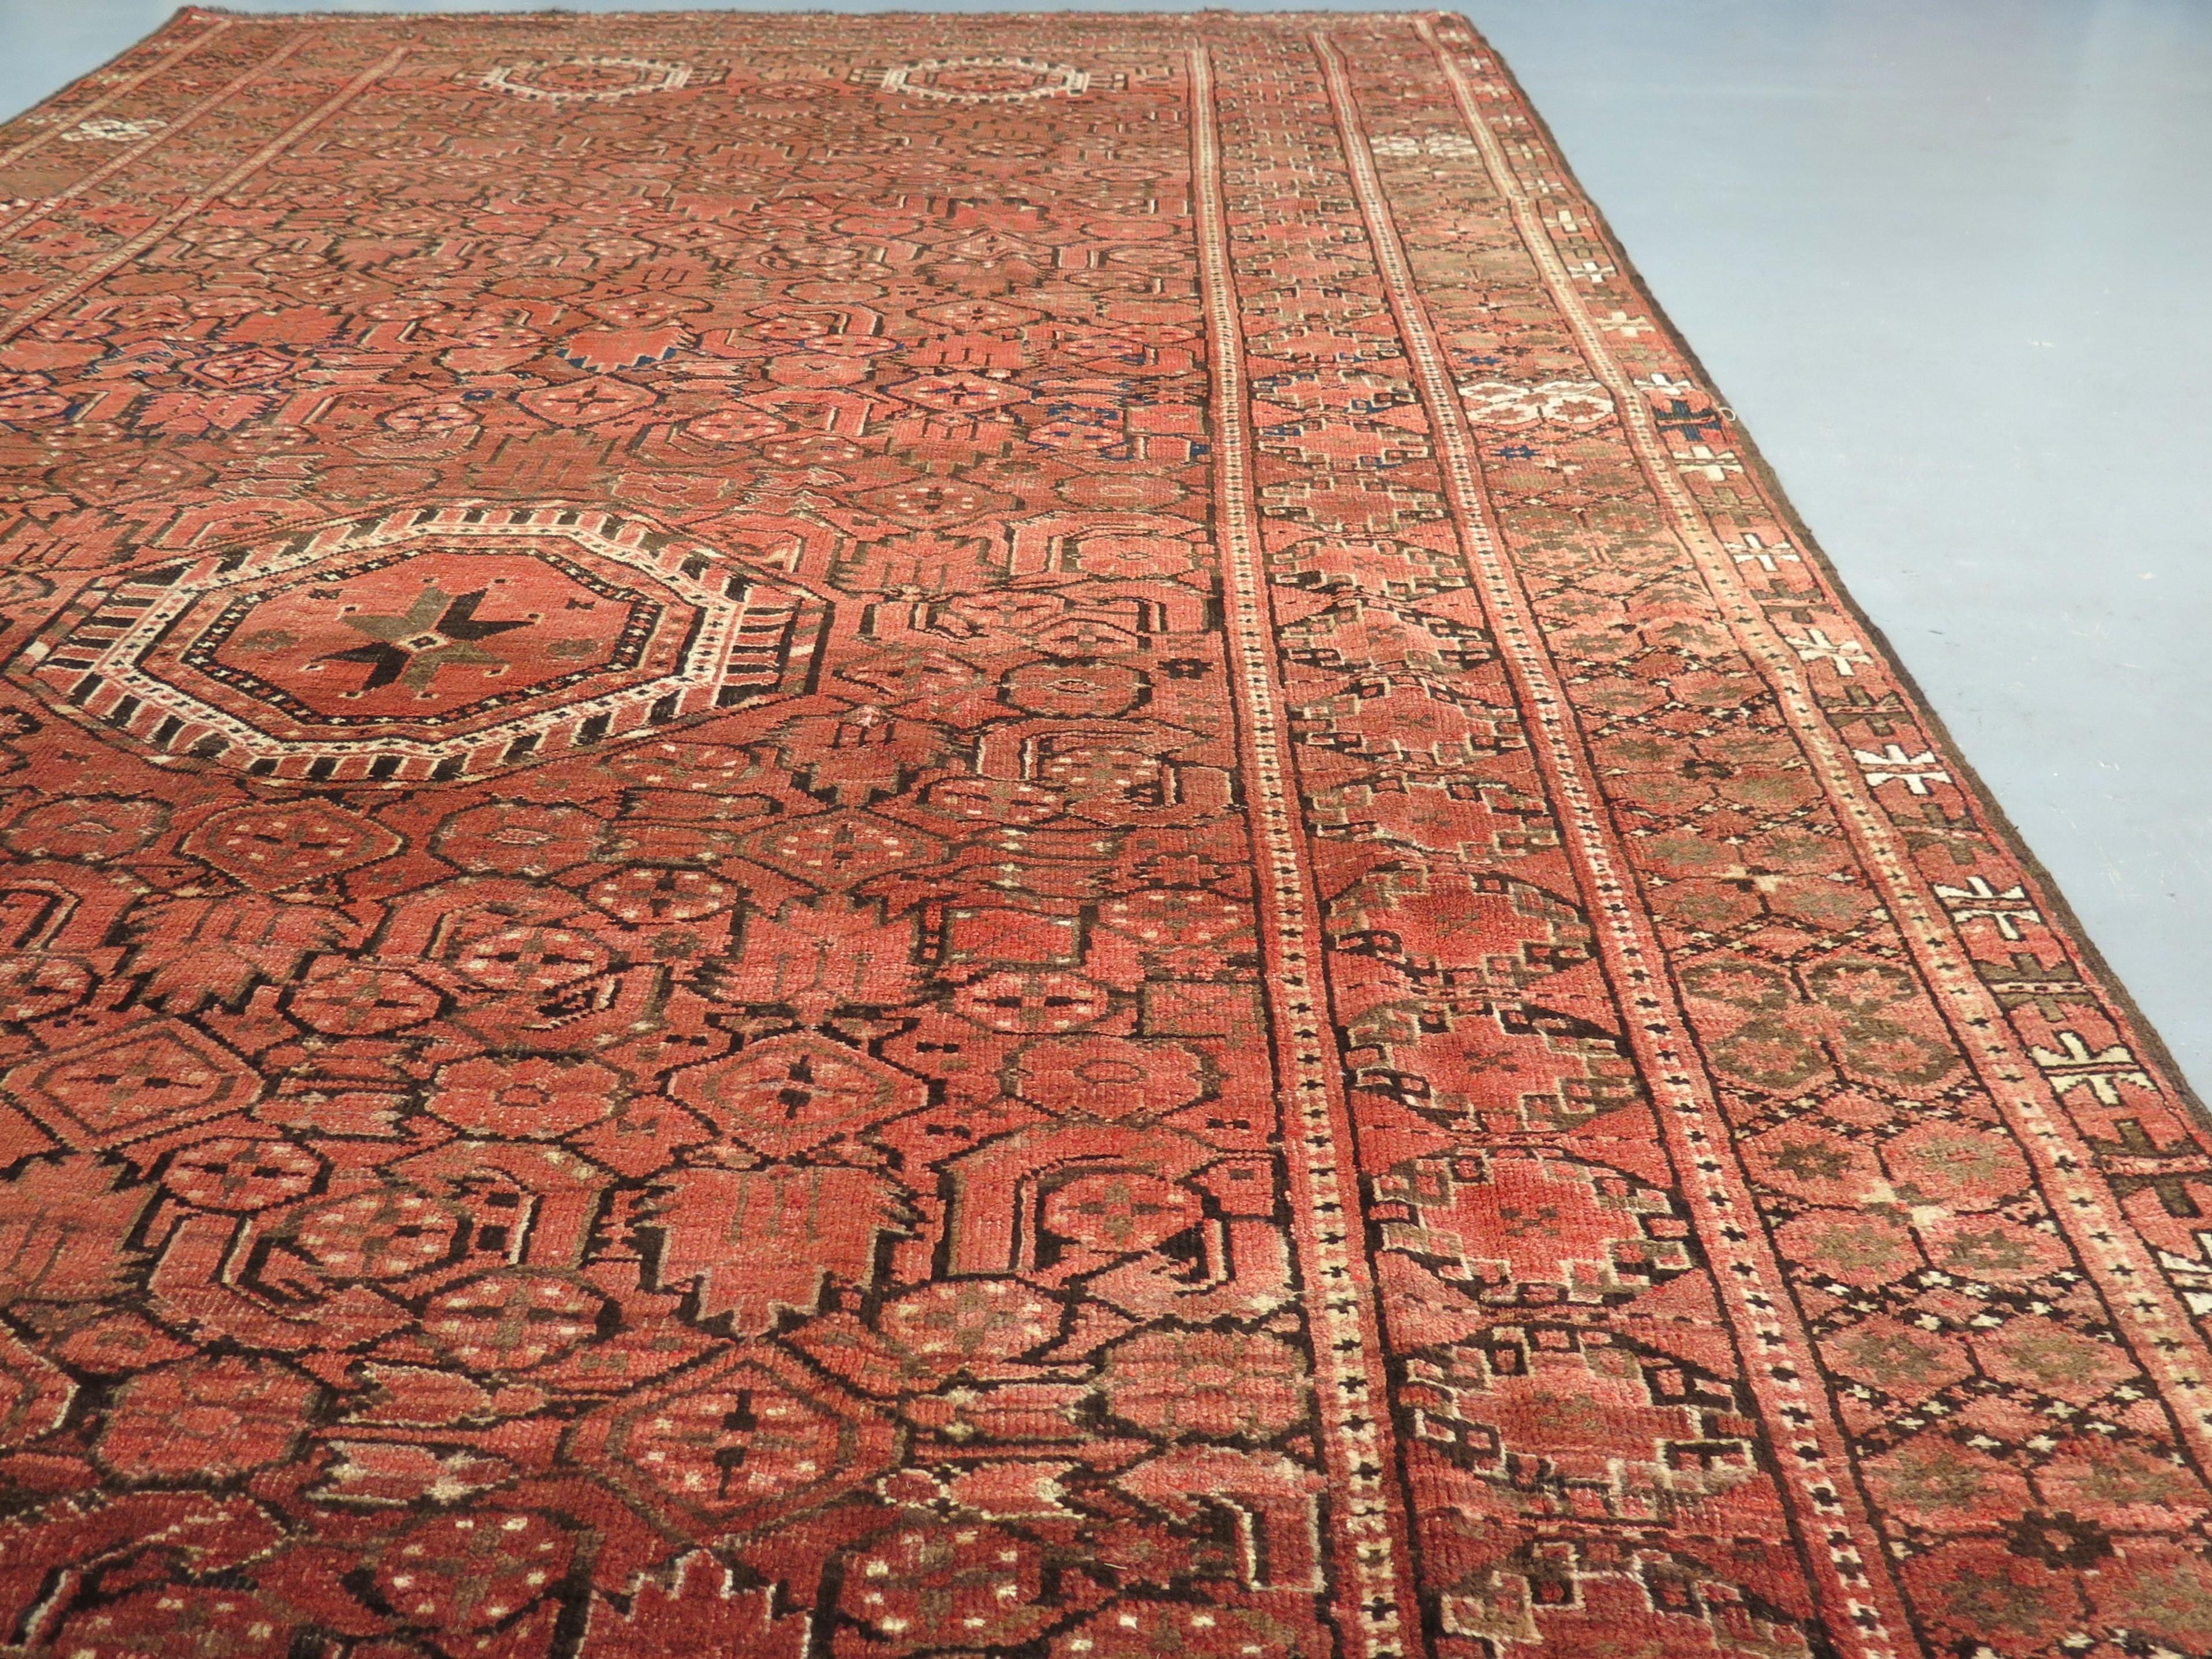 Early Beshir rugs were woven in Turkmenistan, in Central Asia. They are best known for their distinctive weaving style, in a region where most rugs produced by their neighbouring tribes can be recognised by their so-called elephant foot pattern,